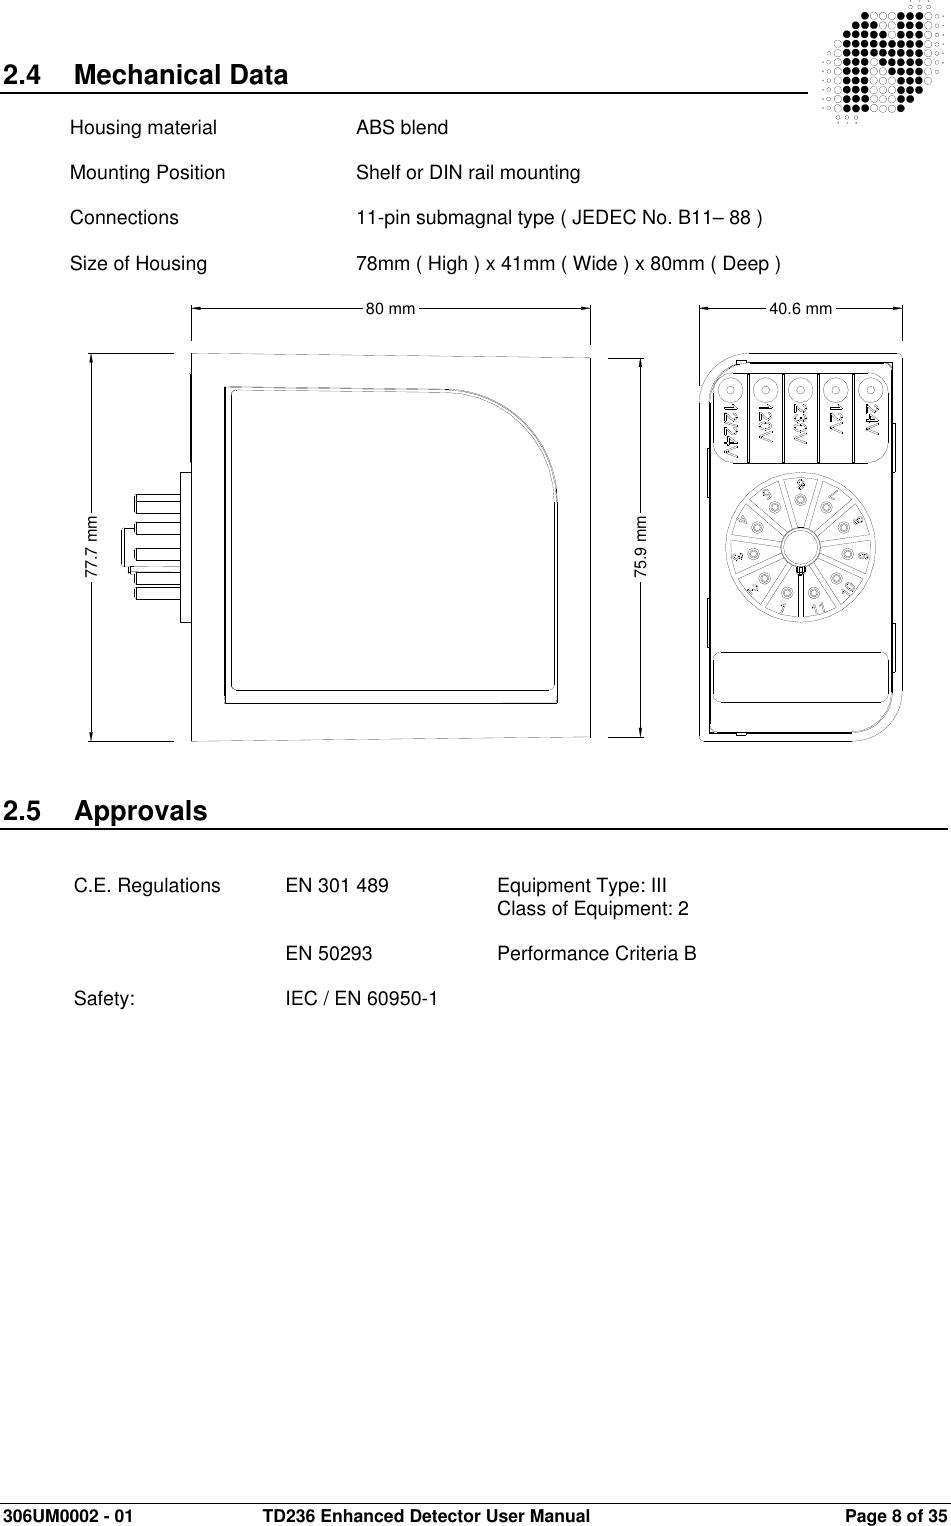  306UM0002 - 01  TD236 Enhanced Detector User Manual   Page 8 of 35  2.4  Mechanical Data  Housing material   ABS blend  Mounting Position    Shelf or DIN rail mounting  Connections      11-pin submagnal type ( JEDEC No. B11– 88 )  Size of Housing     78mm ( High ) x 41mm ( Wide ) x 80mm ( Deep )                          2.5  Approvals   C.E. Regulations  EN 301 489    Equipment Type: III               Class of Equipment: 2        EN 50293    Performance Criteria B   Safety:      IEC / EN 60950-1    80 mm75.9 mm77.7 mm40.6 mm